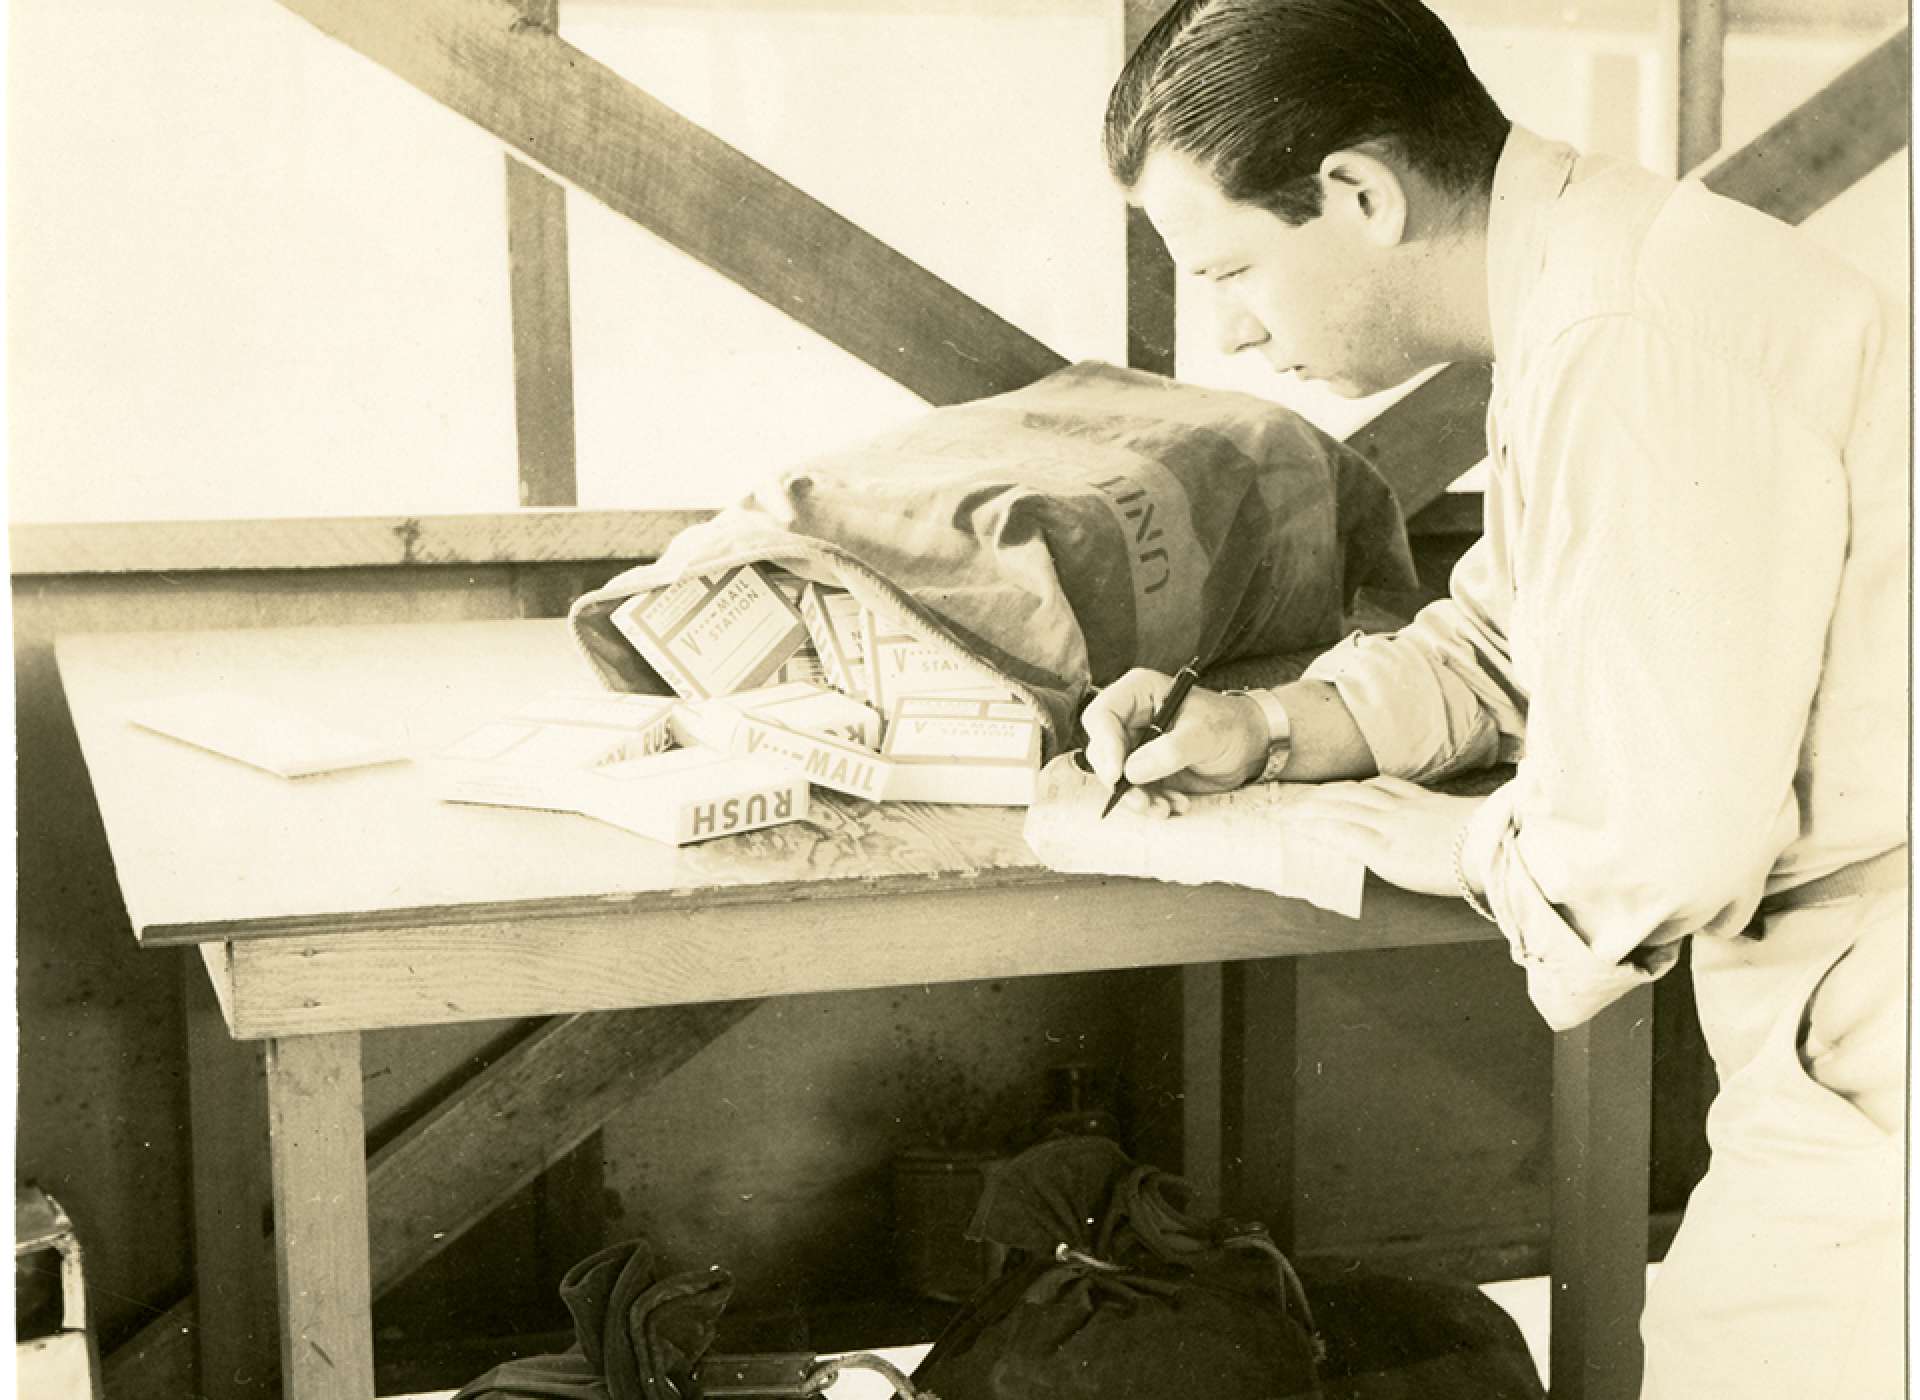 V-mail operation in the field at APO 929. “Initial step in the Receiving section is this operation of checking the postal dispatch sheets and logging in the rolls received from the States. This section is now receiving and completely processing an average of seventy rolls per day.” Port Moresby, Papua New Guinea. 1944